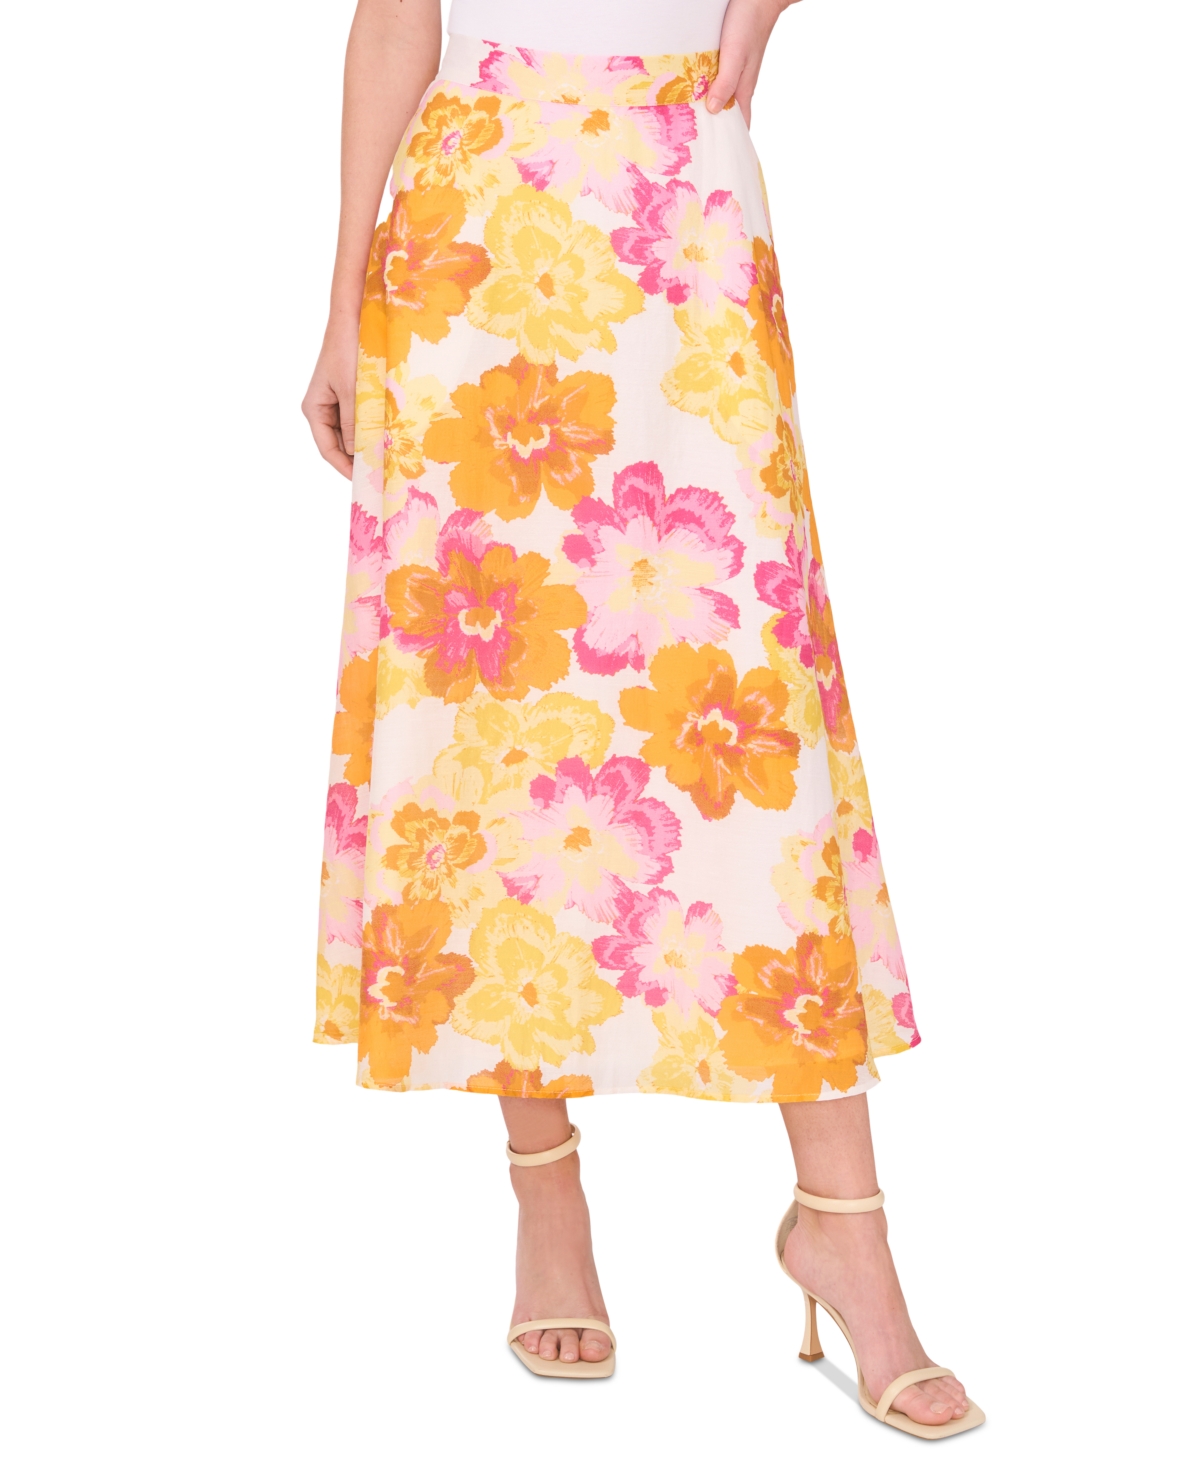 Women's Floral A-Line Midi Skirt - Radiant Yellow